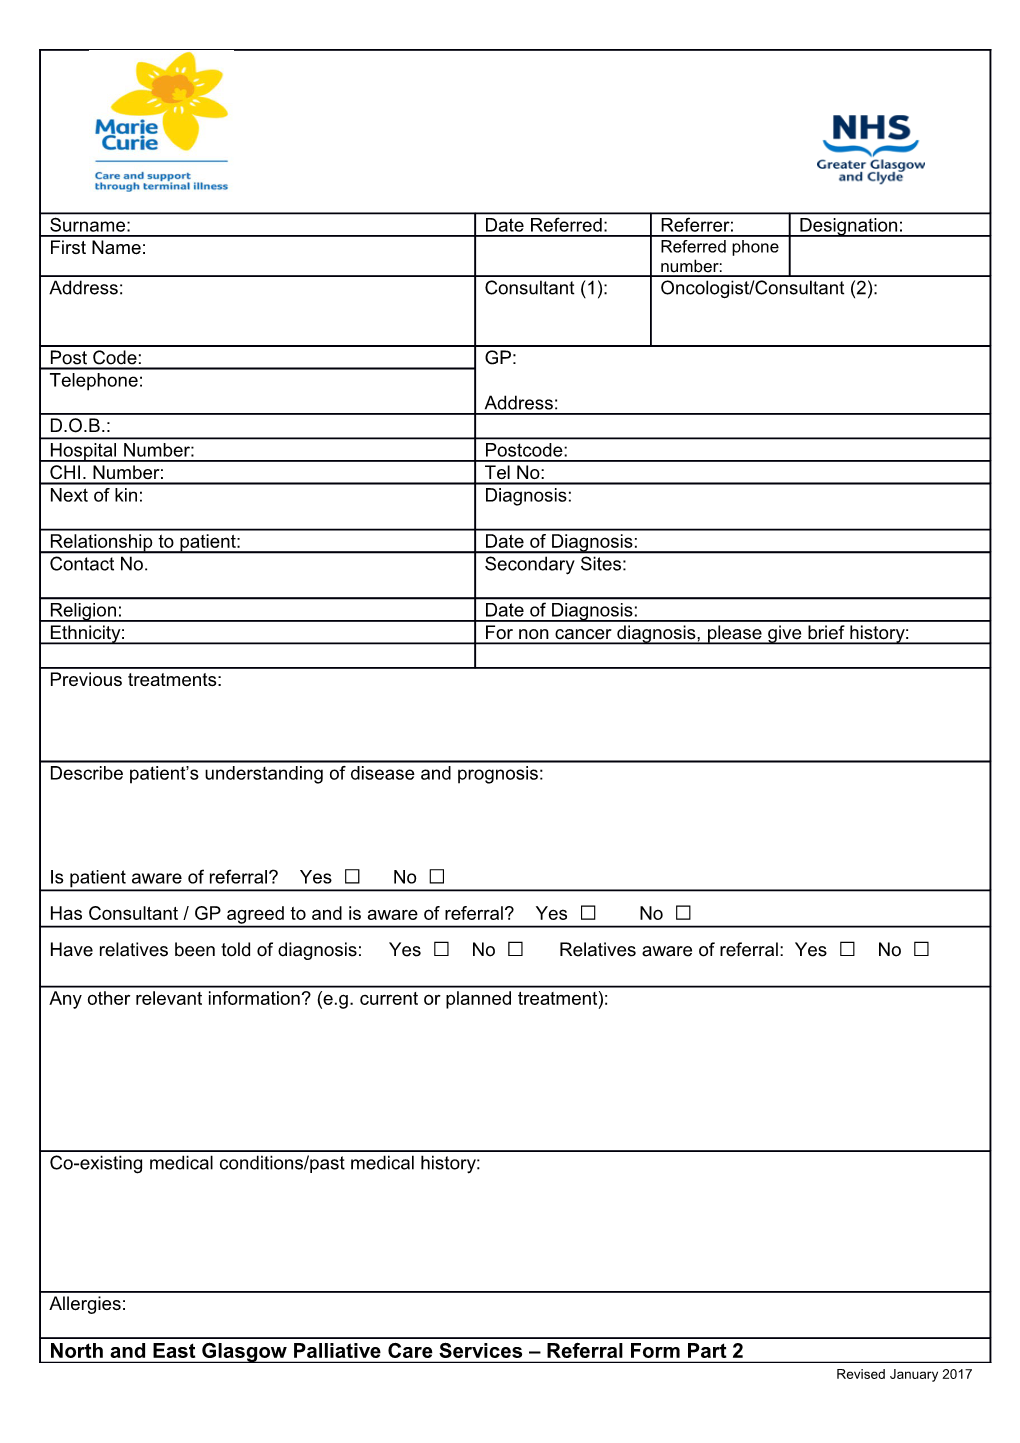 Marie Curie Referral Form 2016